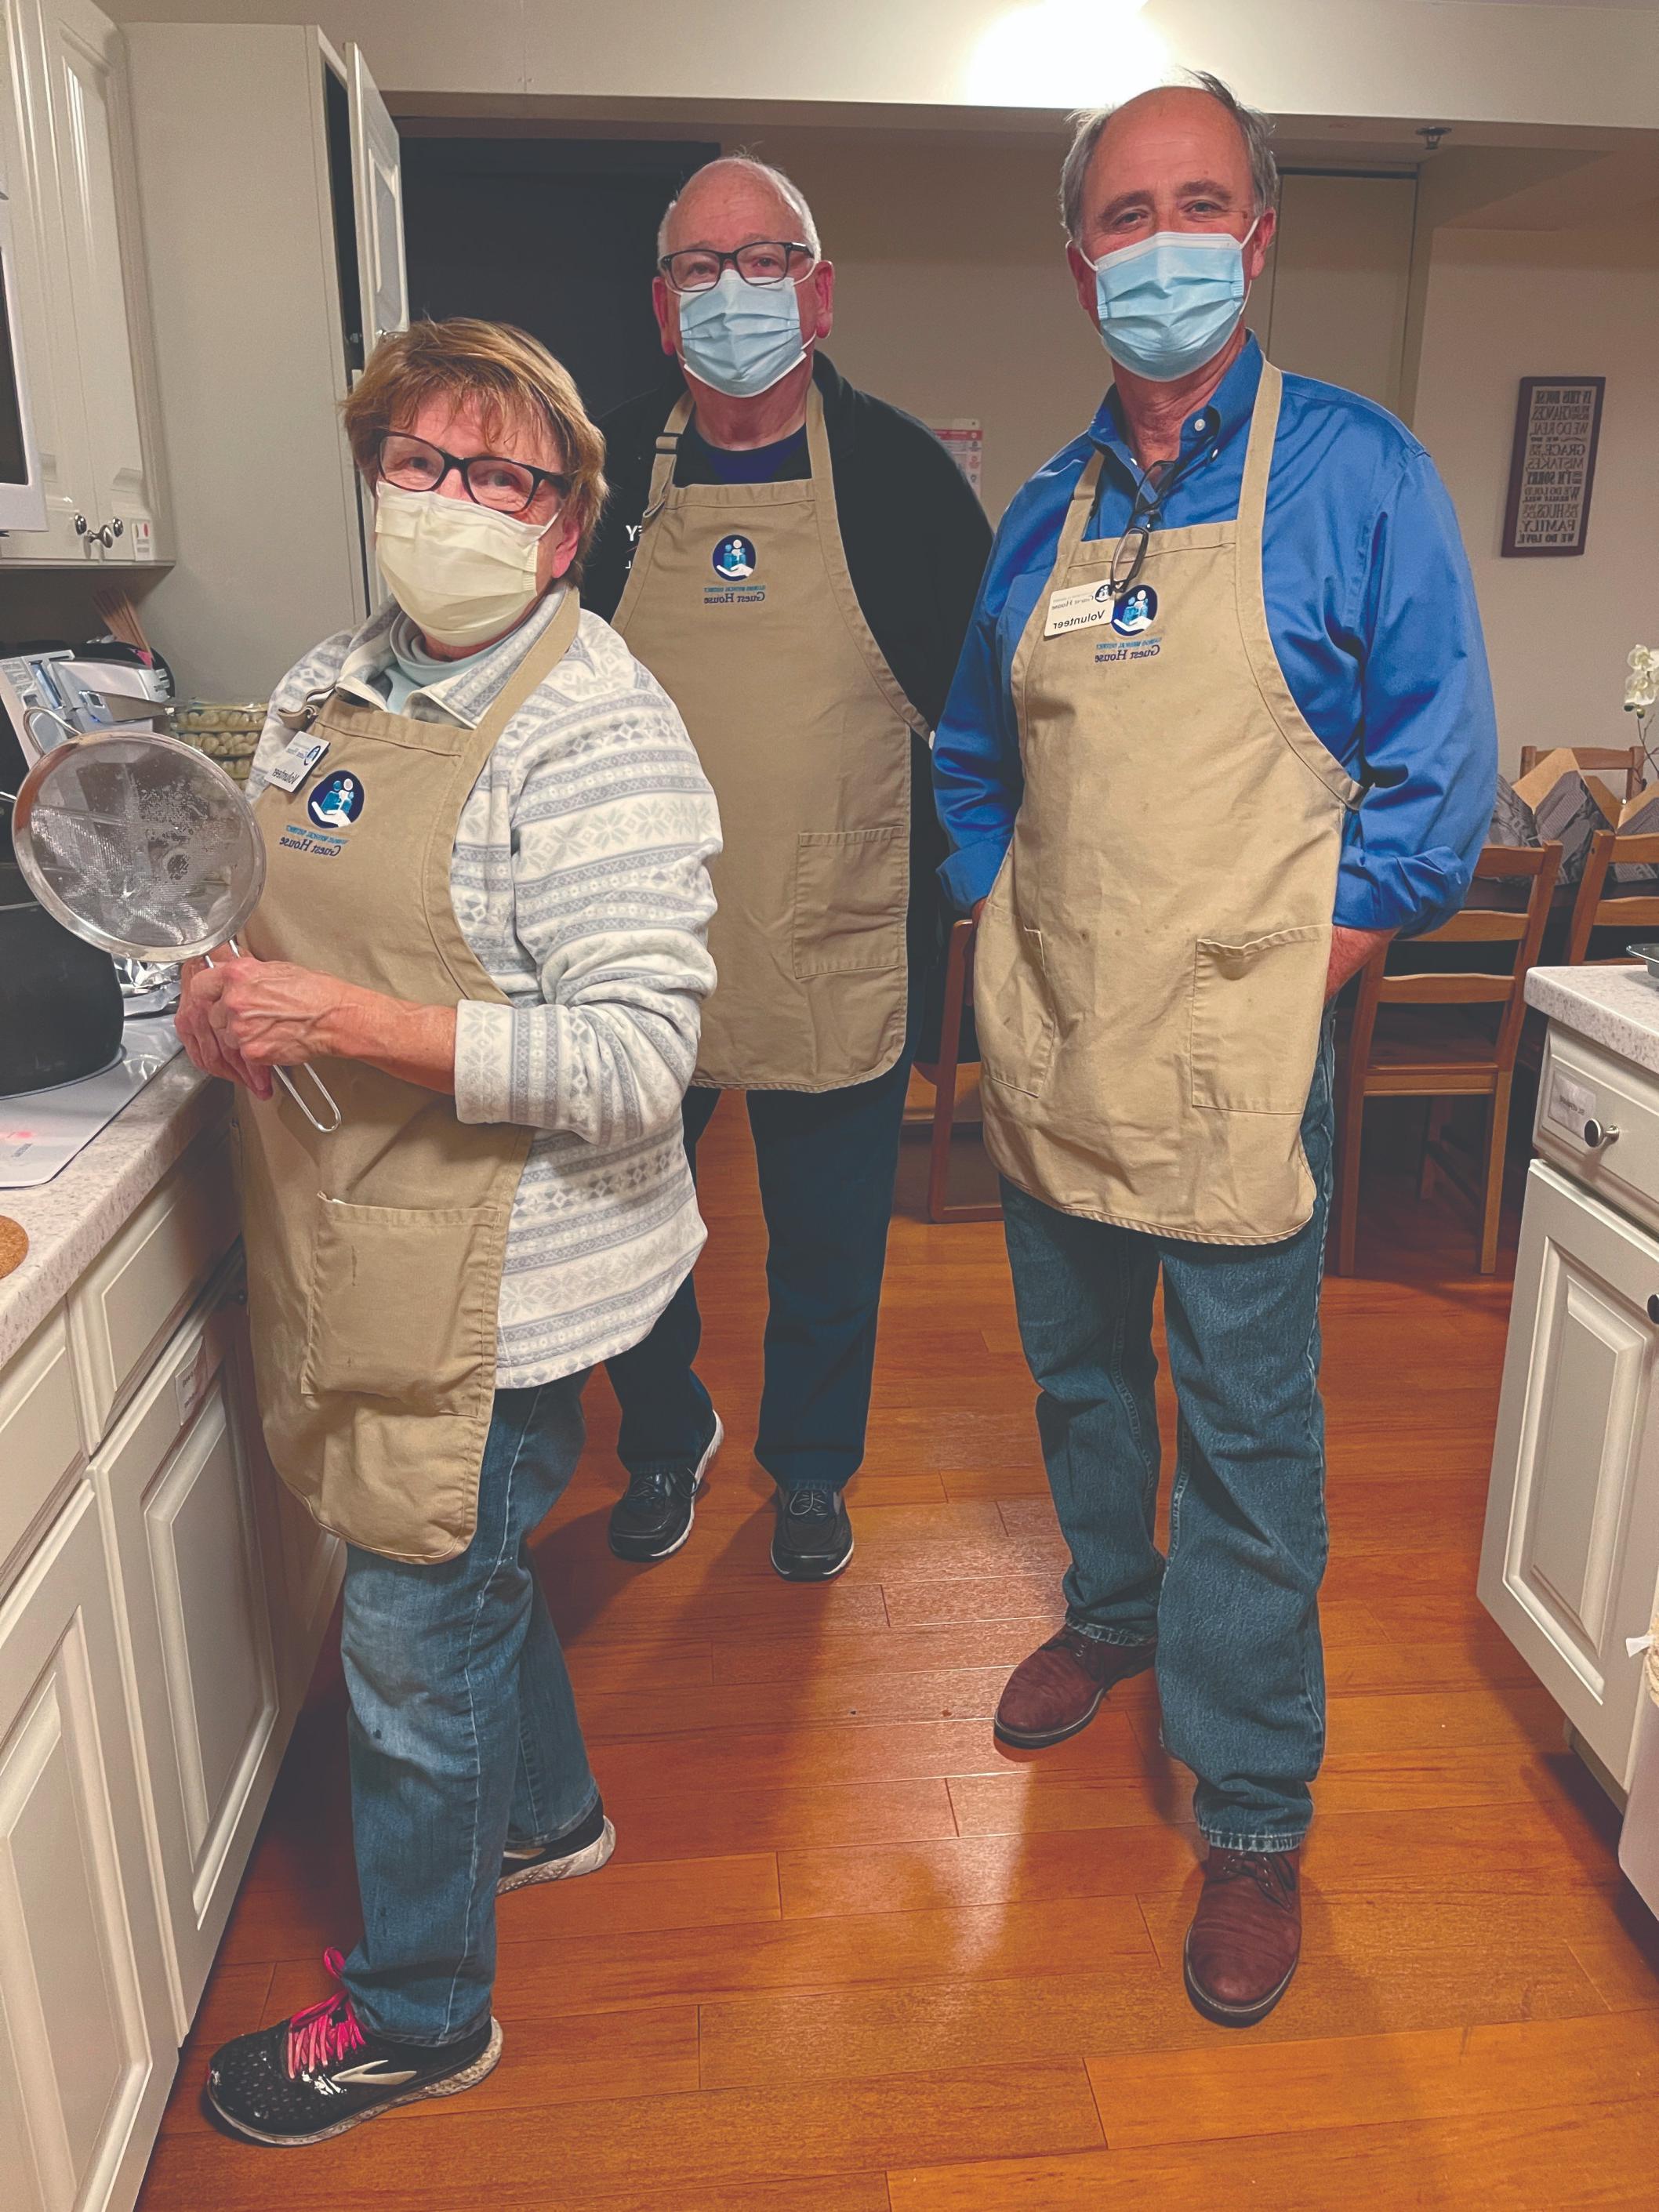 Three voluneers stand in a kitchen wearing masks and beige aprons embroidered with the Guest House logo.